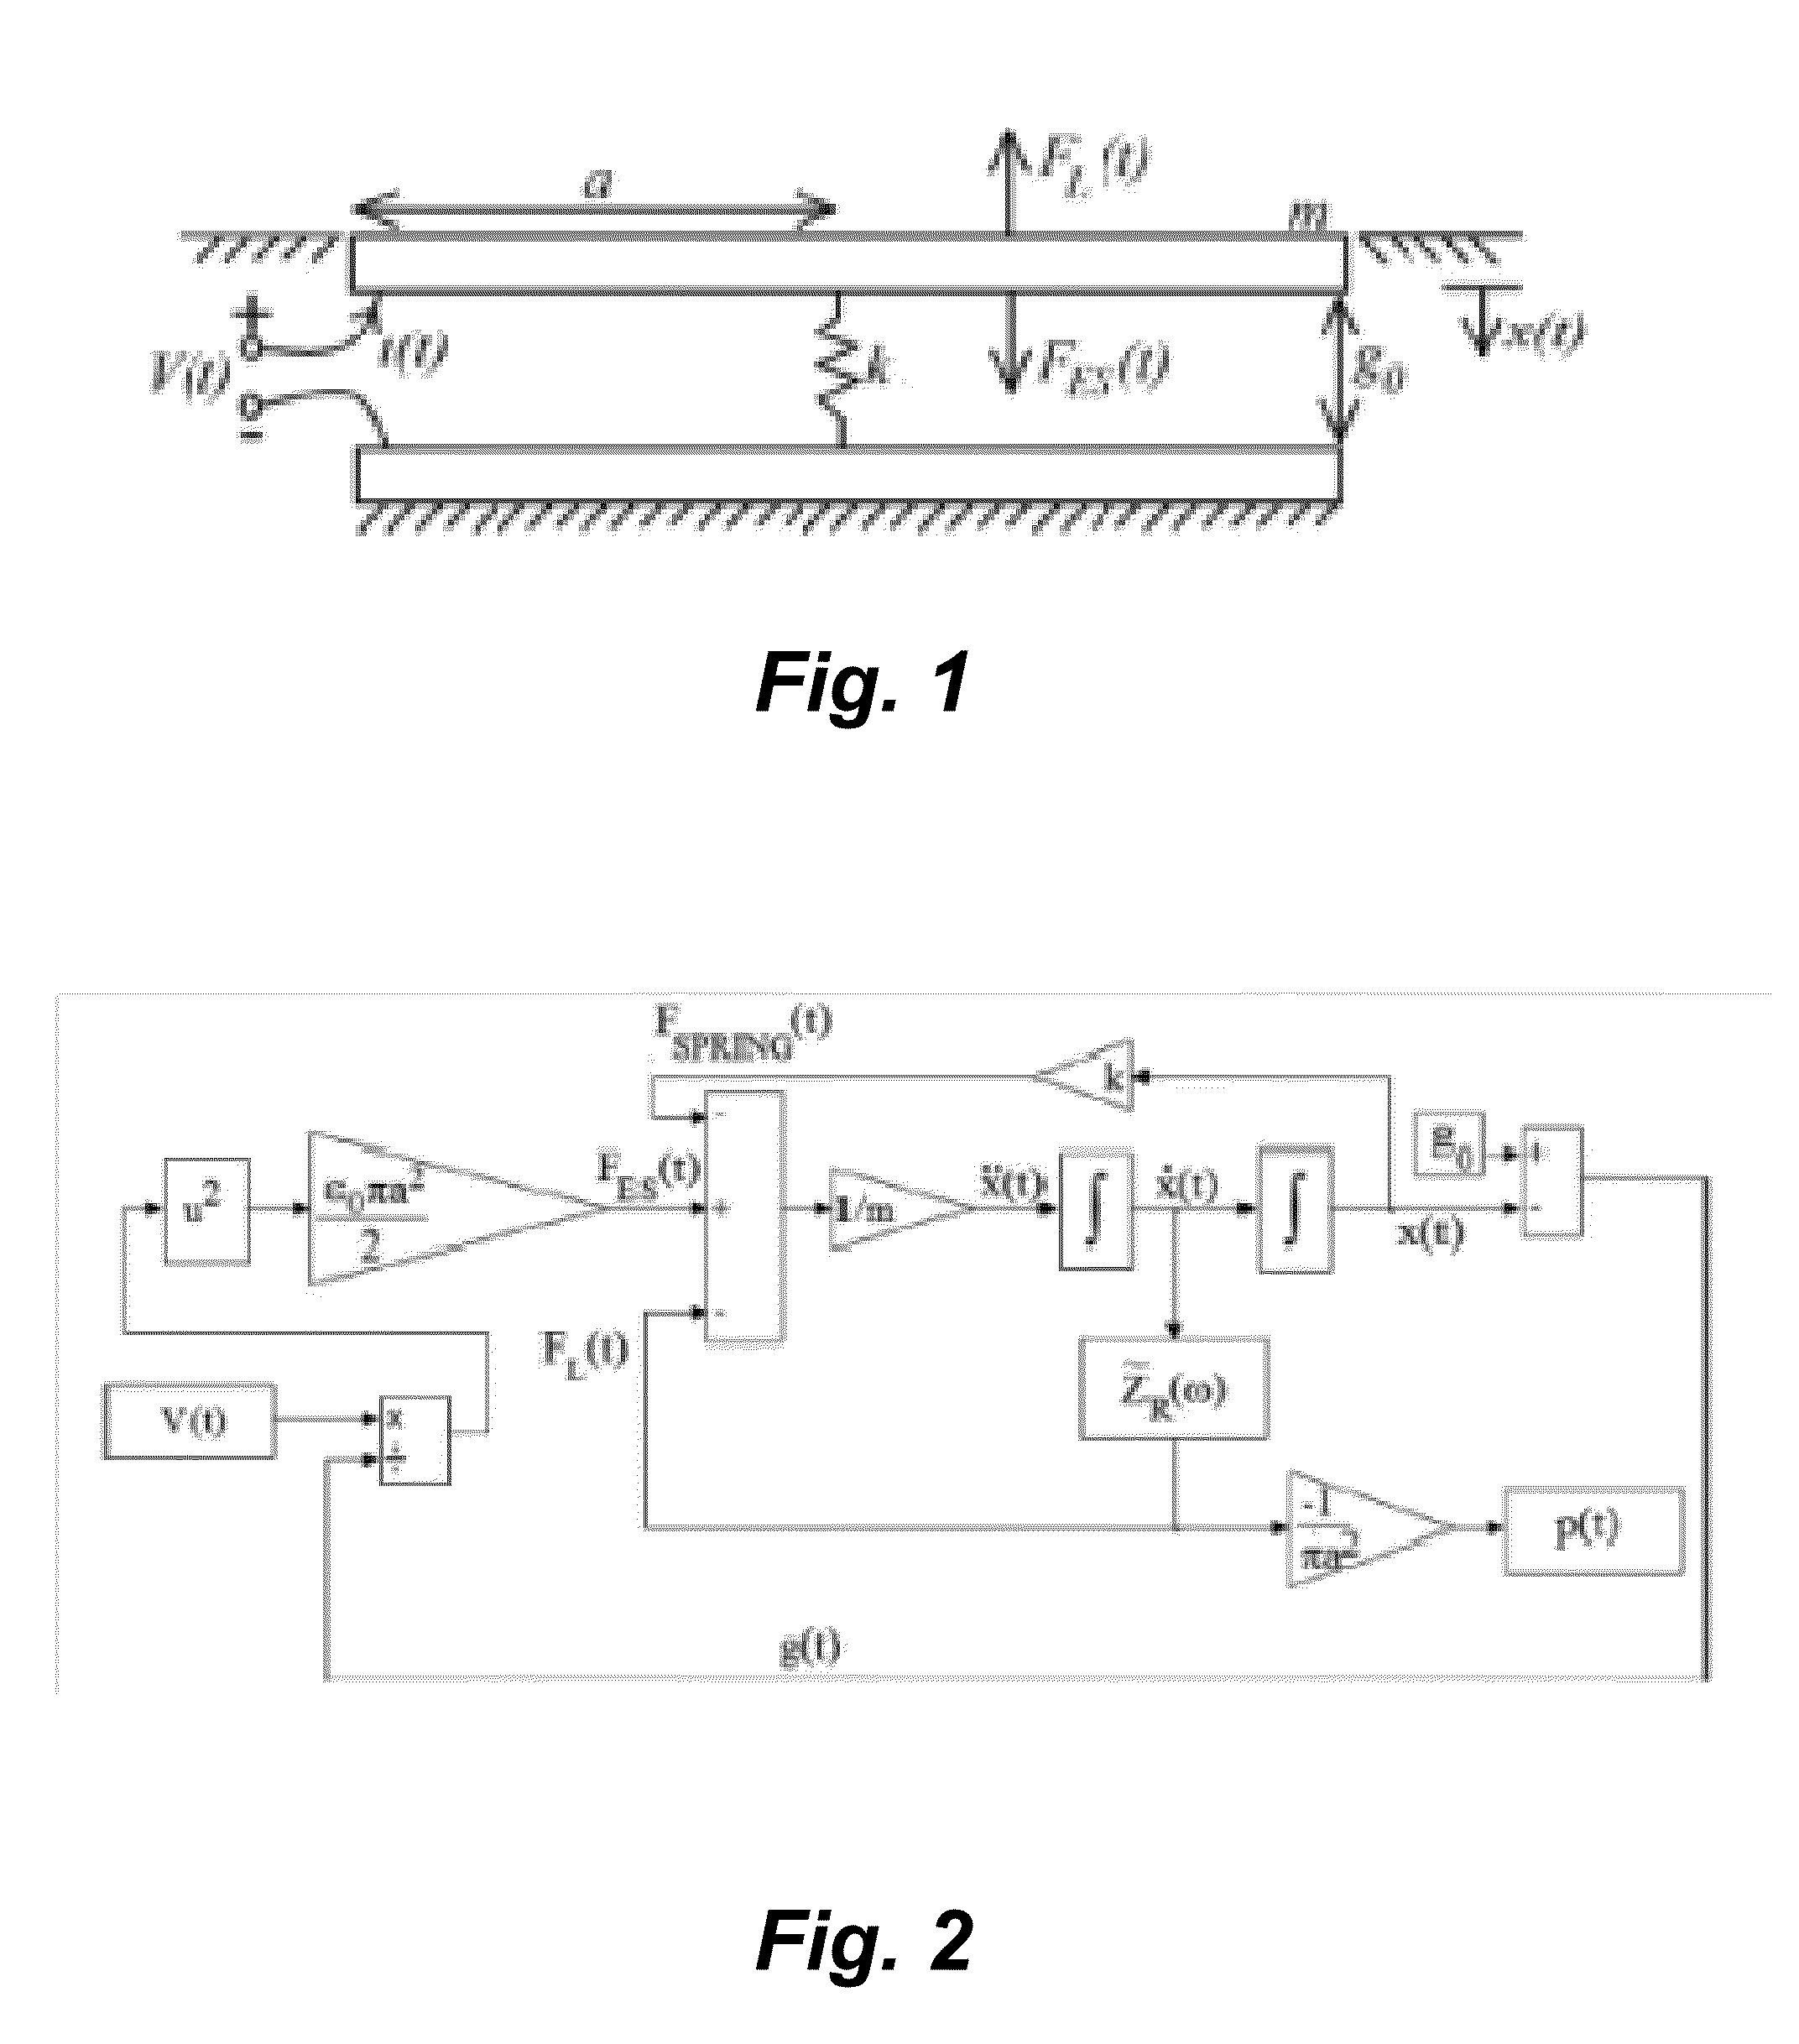 Systems and methods for harmonic reduction in capacitive micromachined ultrasonic transducers by gap feedback linearization